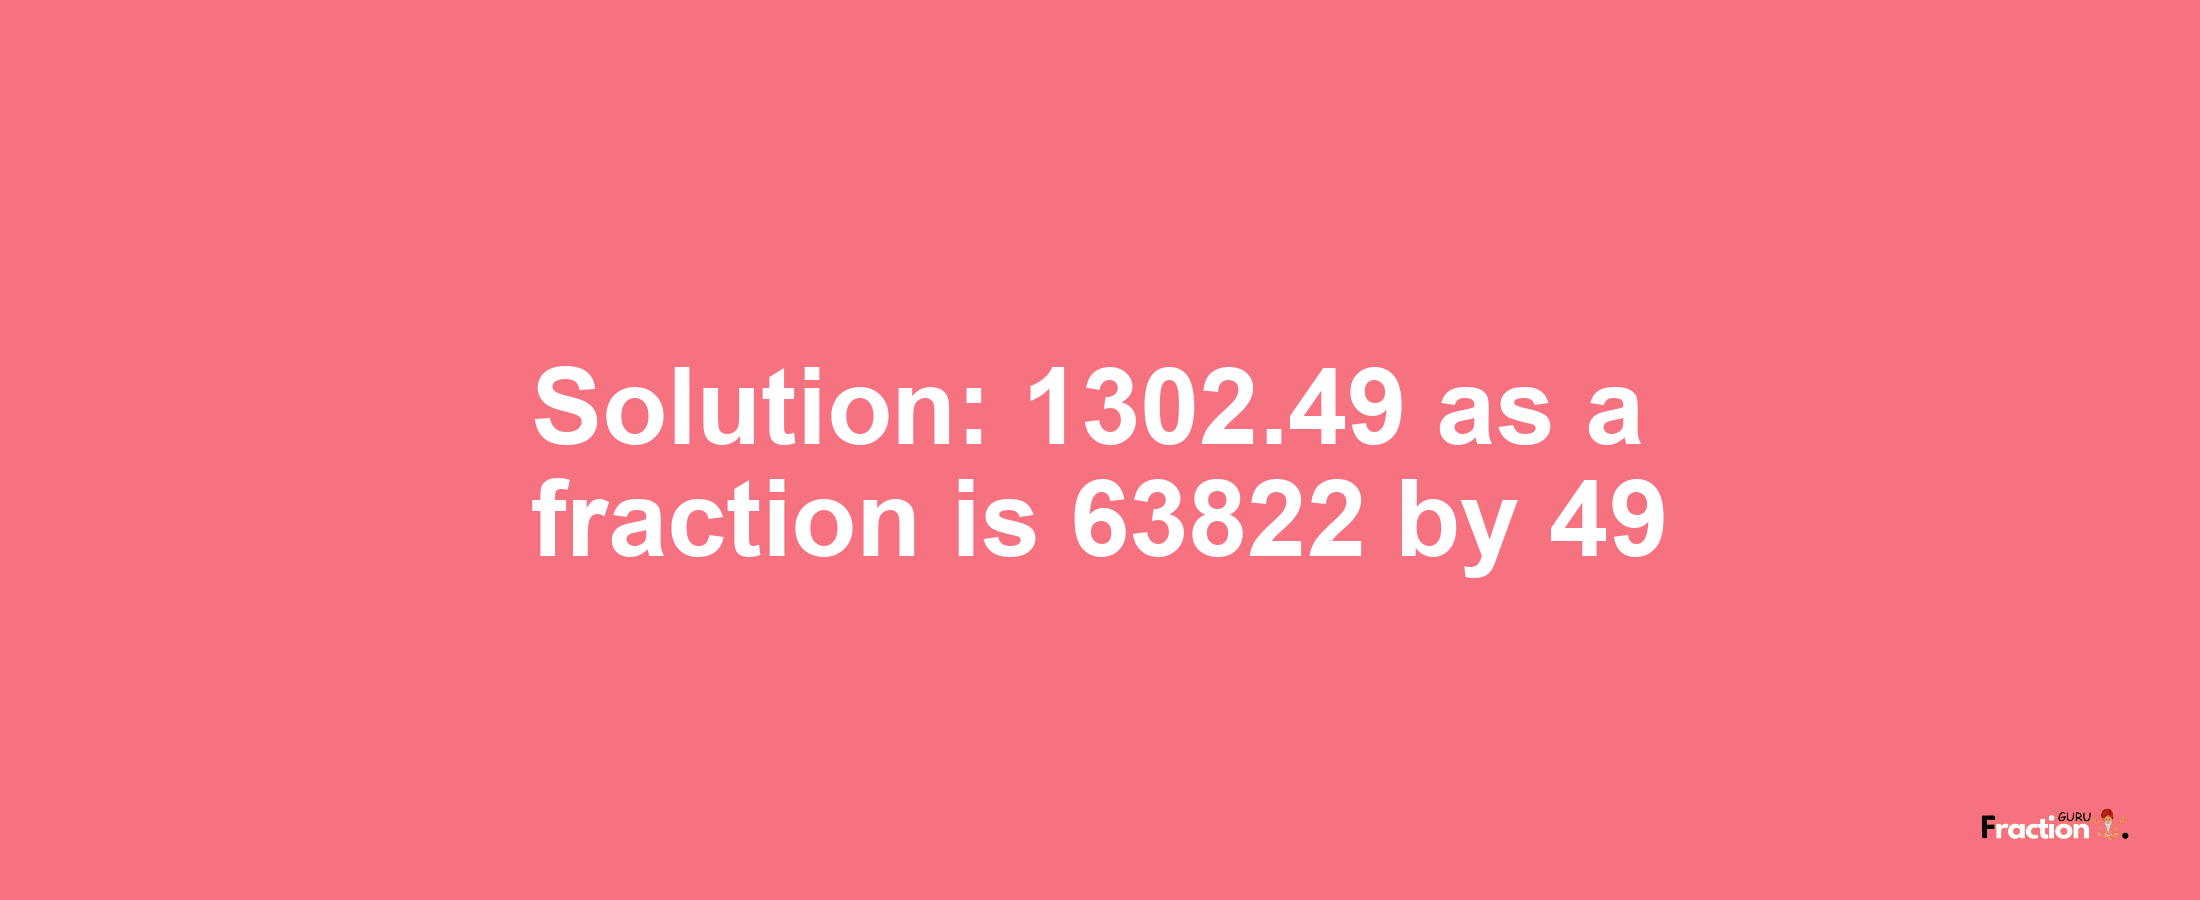 Solution:1302.49 as a fraction is 63822/49